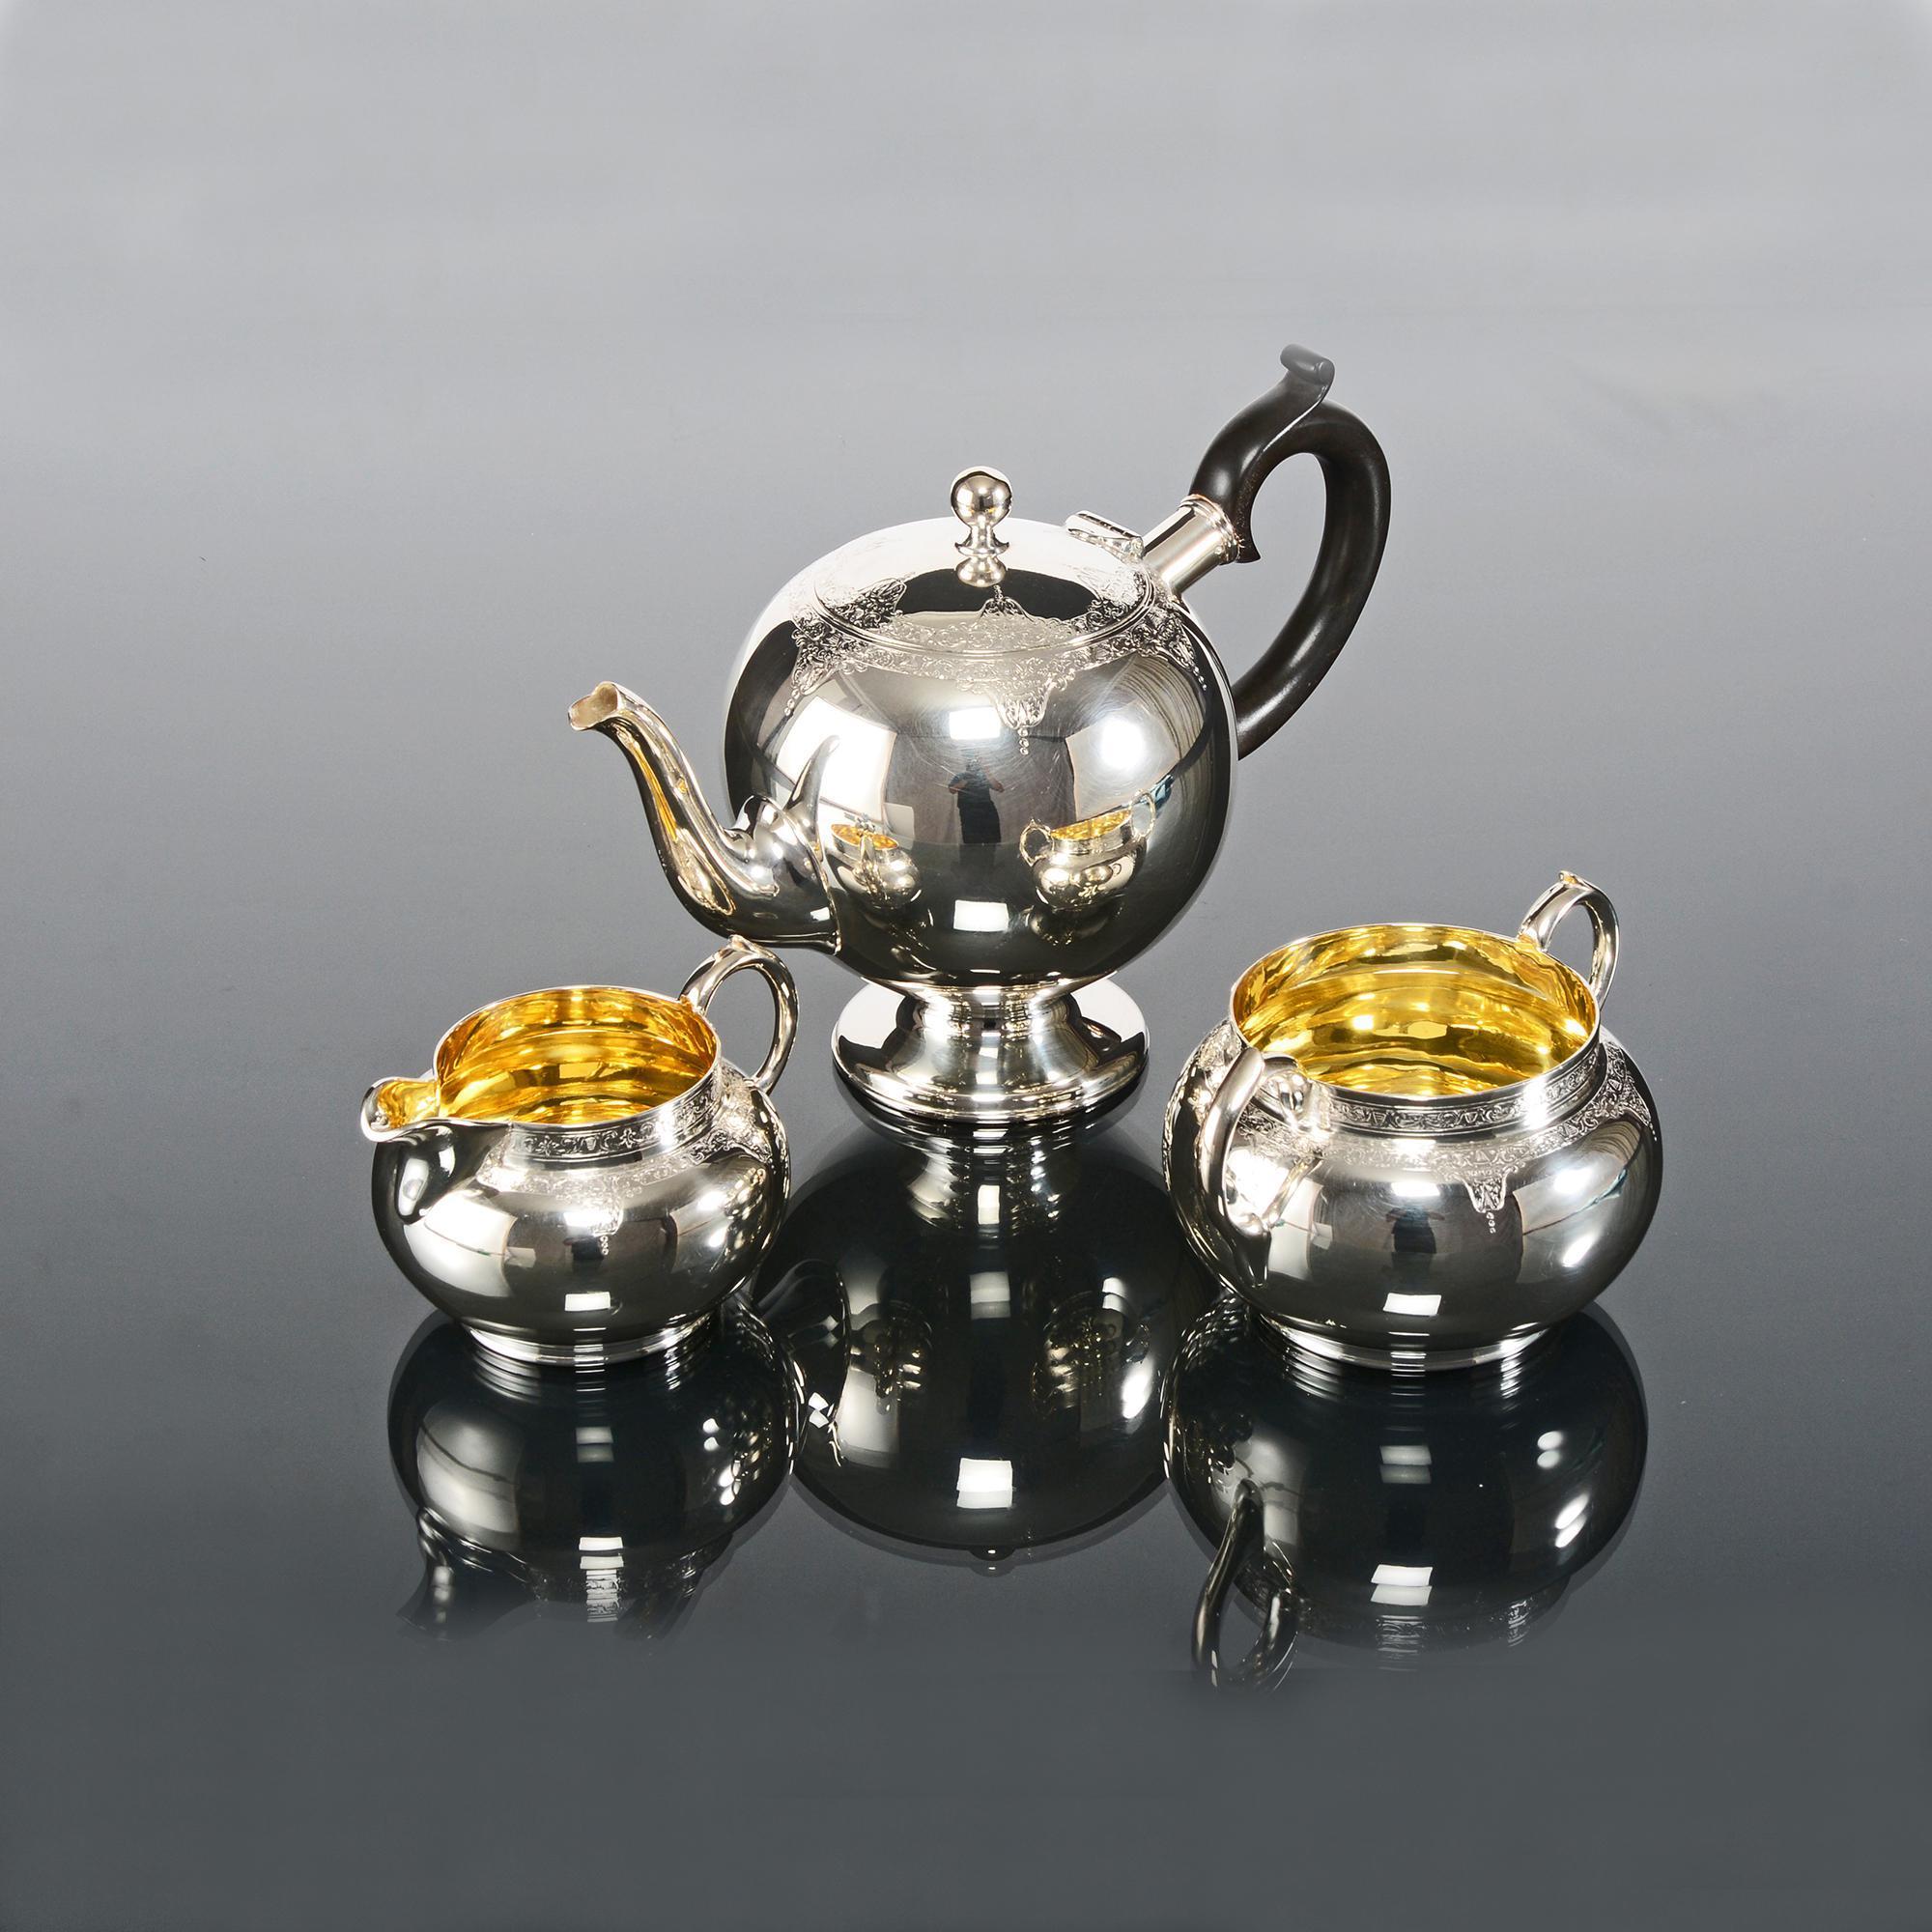 Pleasing three-piece late-Victorian silver tea set with hand raised and delicately hand engraved bodies. The silver teapot has an elegant spout that pours perfectly and is fitted with a fruitwood handle featuring a typical thumbpiece, while the lid